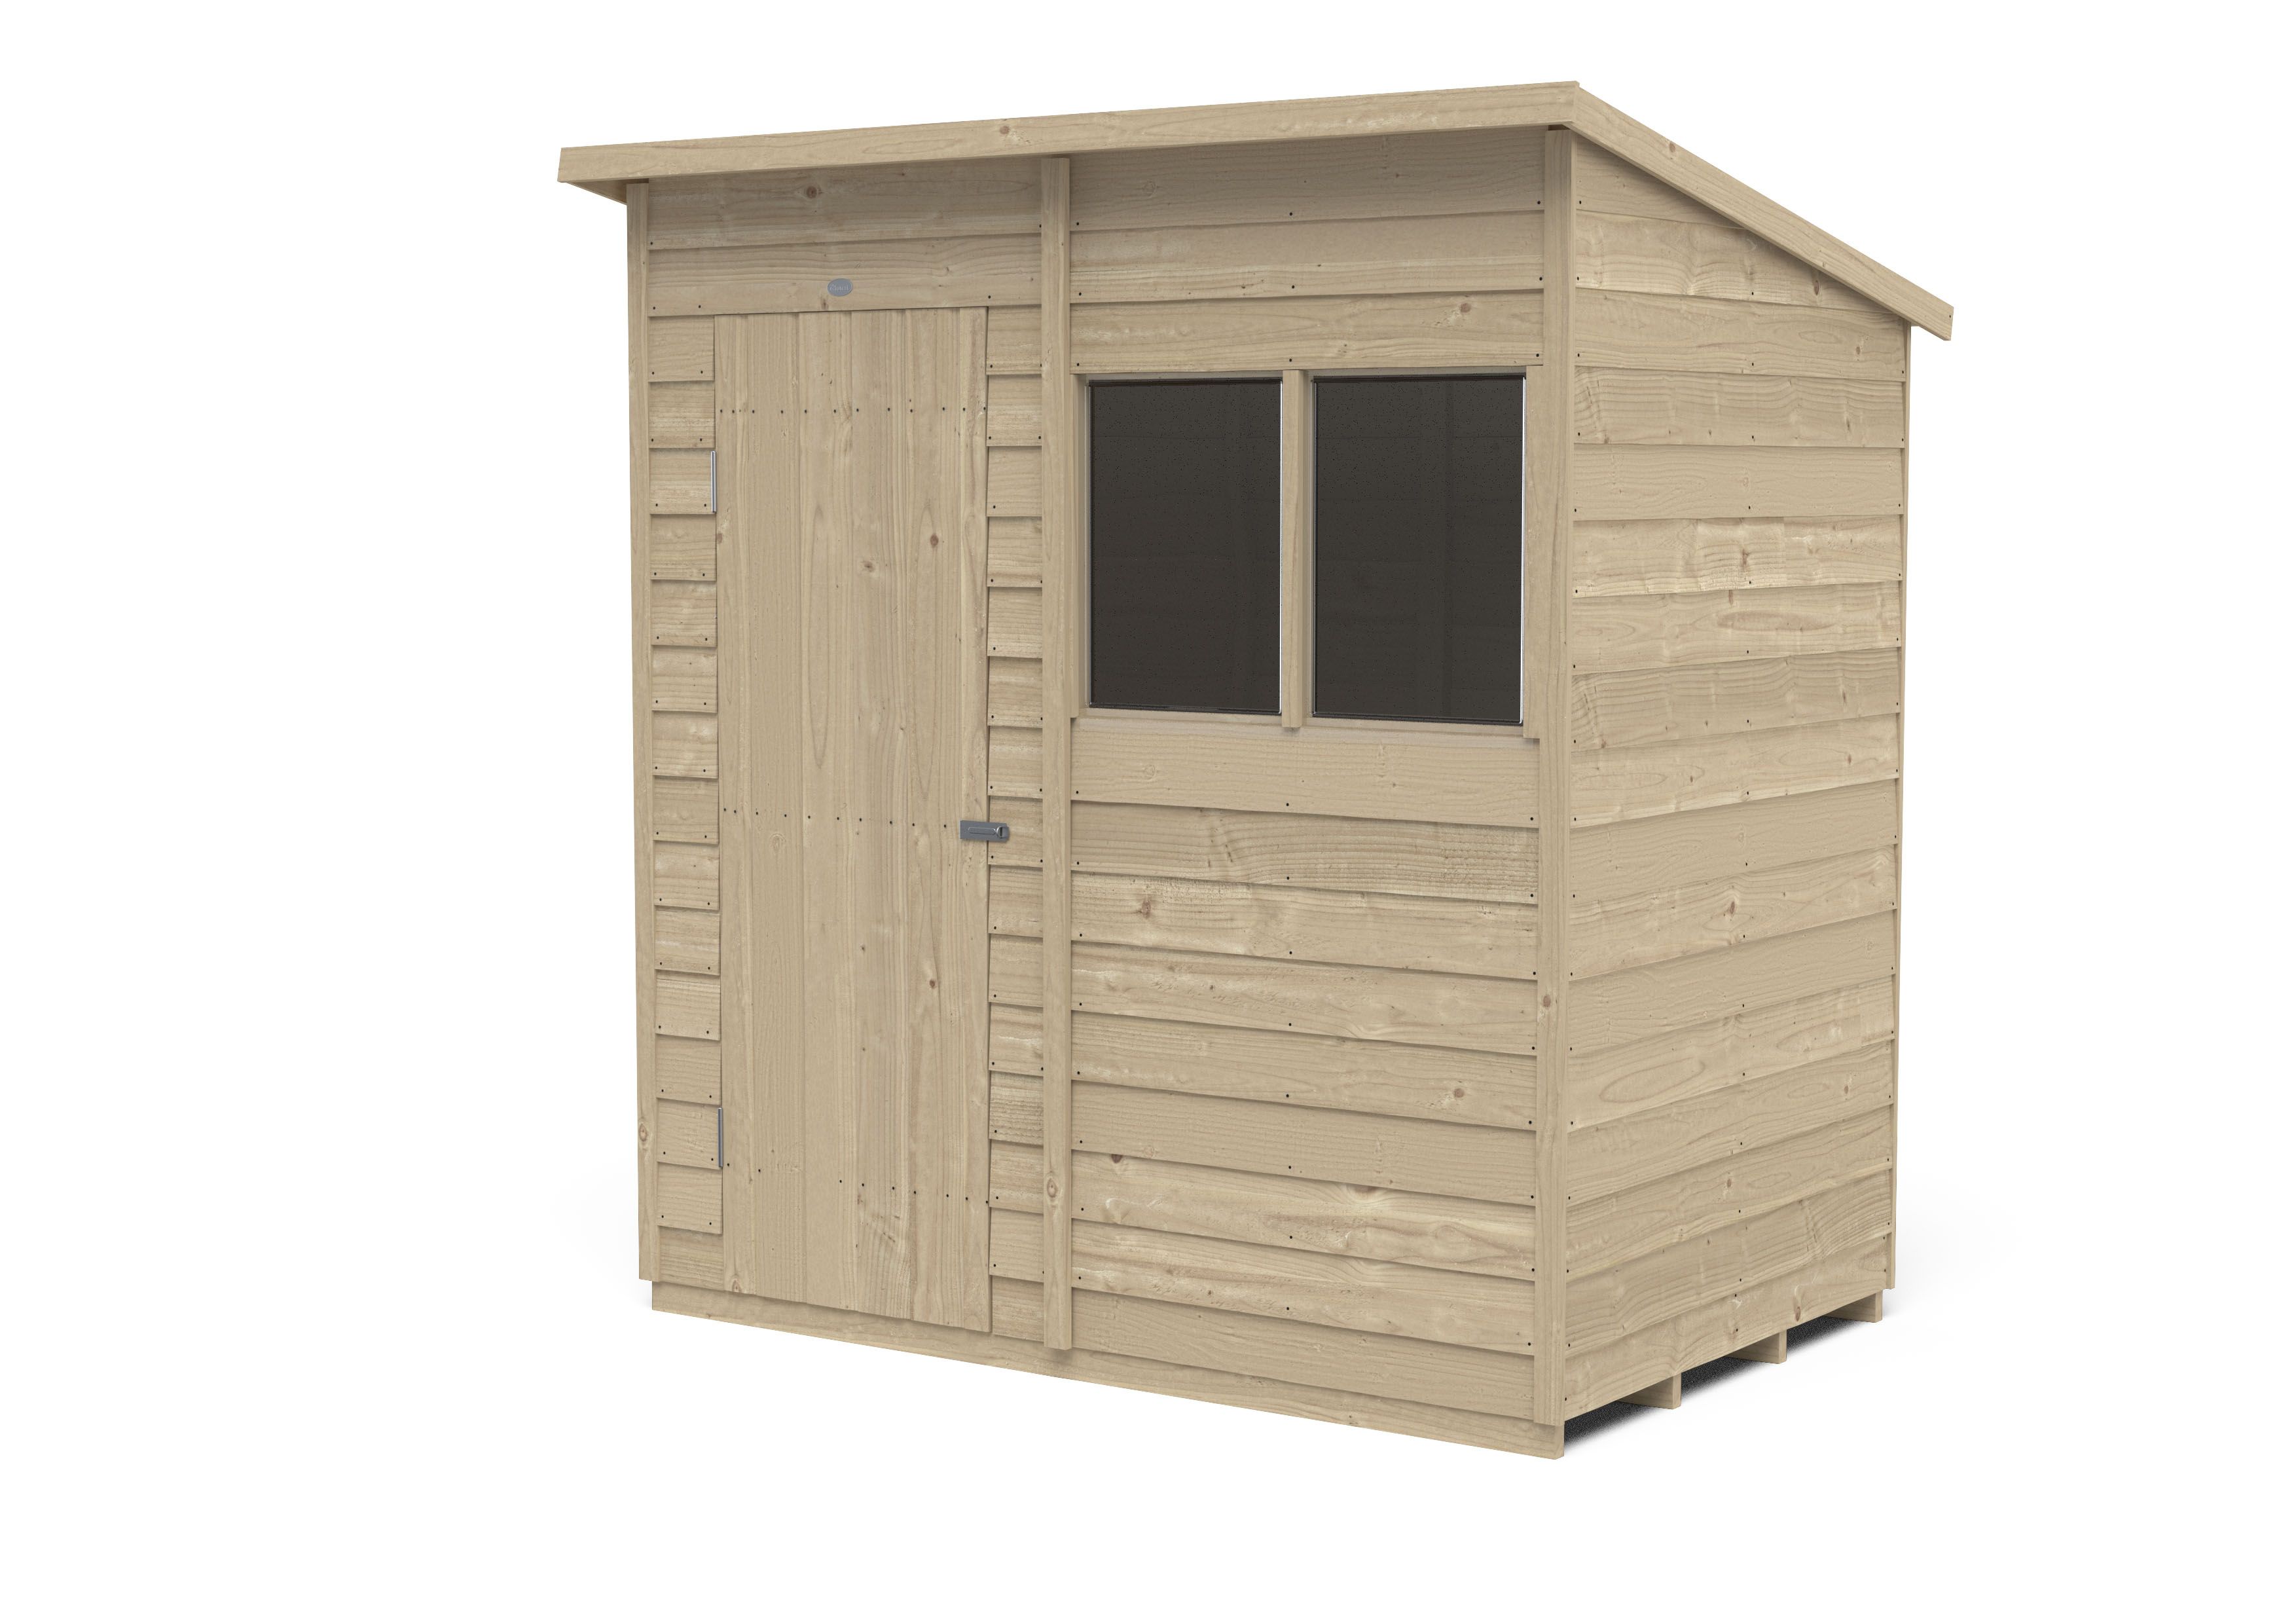 Forest Garden Overlap 6x4 ft Pent Wooden Pressure treated Shed with floor & 2 windows